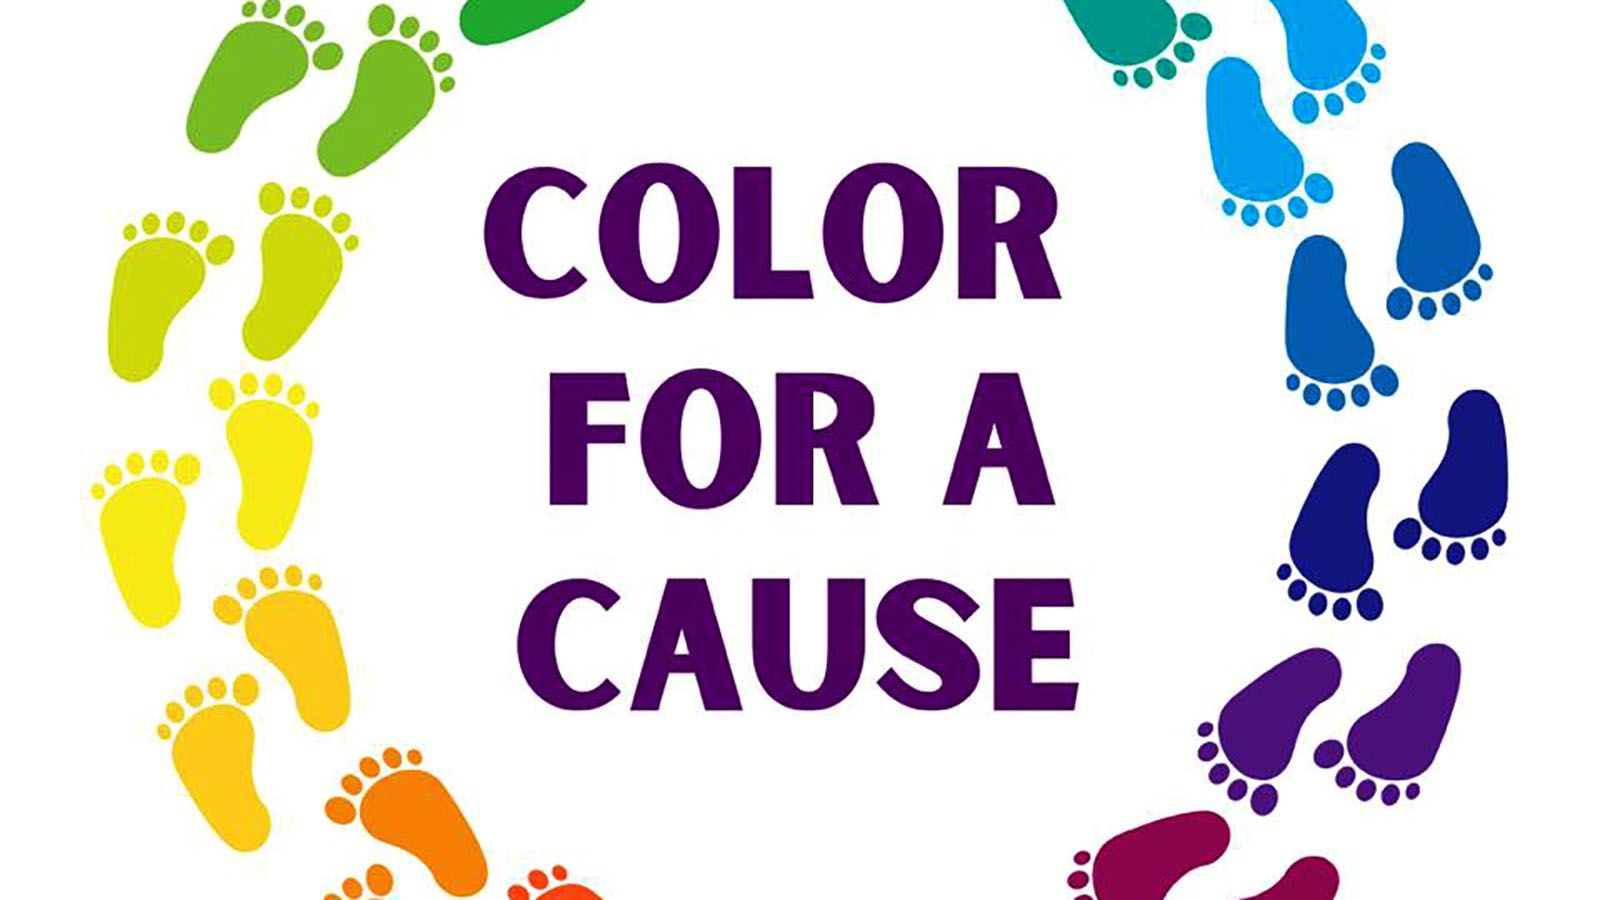 Color for a Cause will be run at Foster Park on May 13.